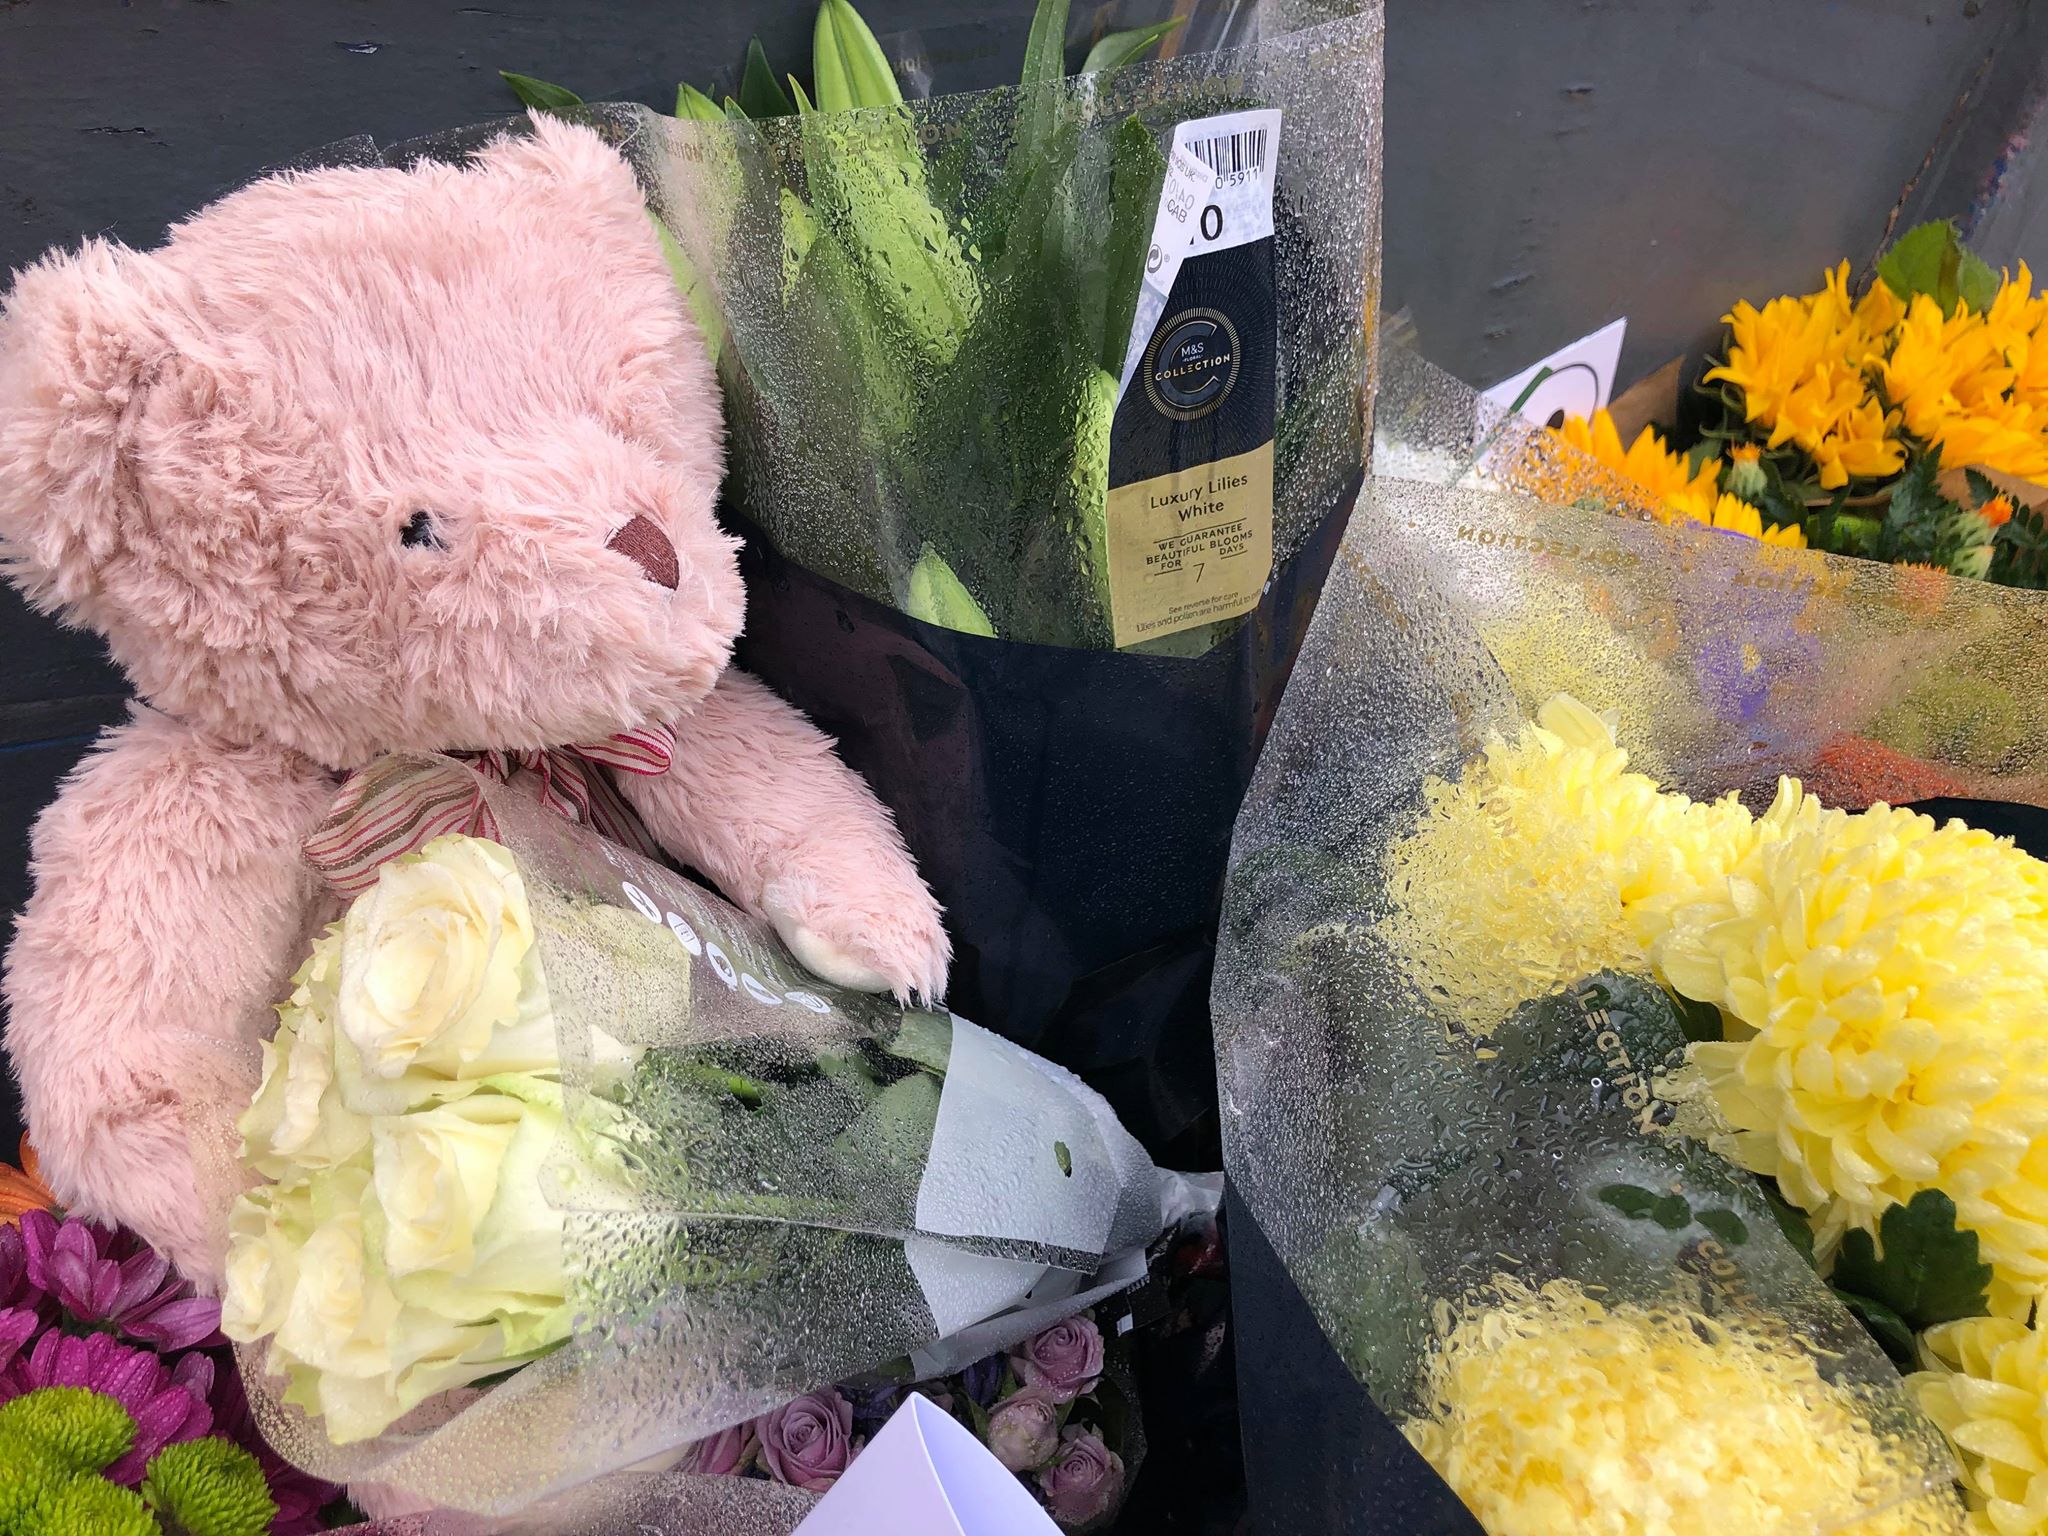 Edinburgh: Members of the public placed flowers and teddies at the scene.